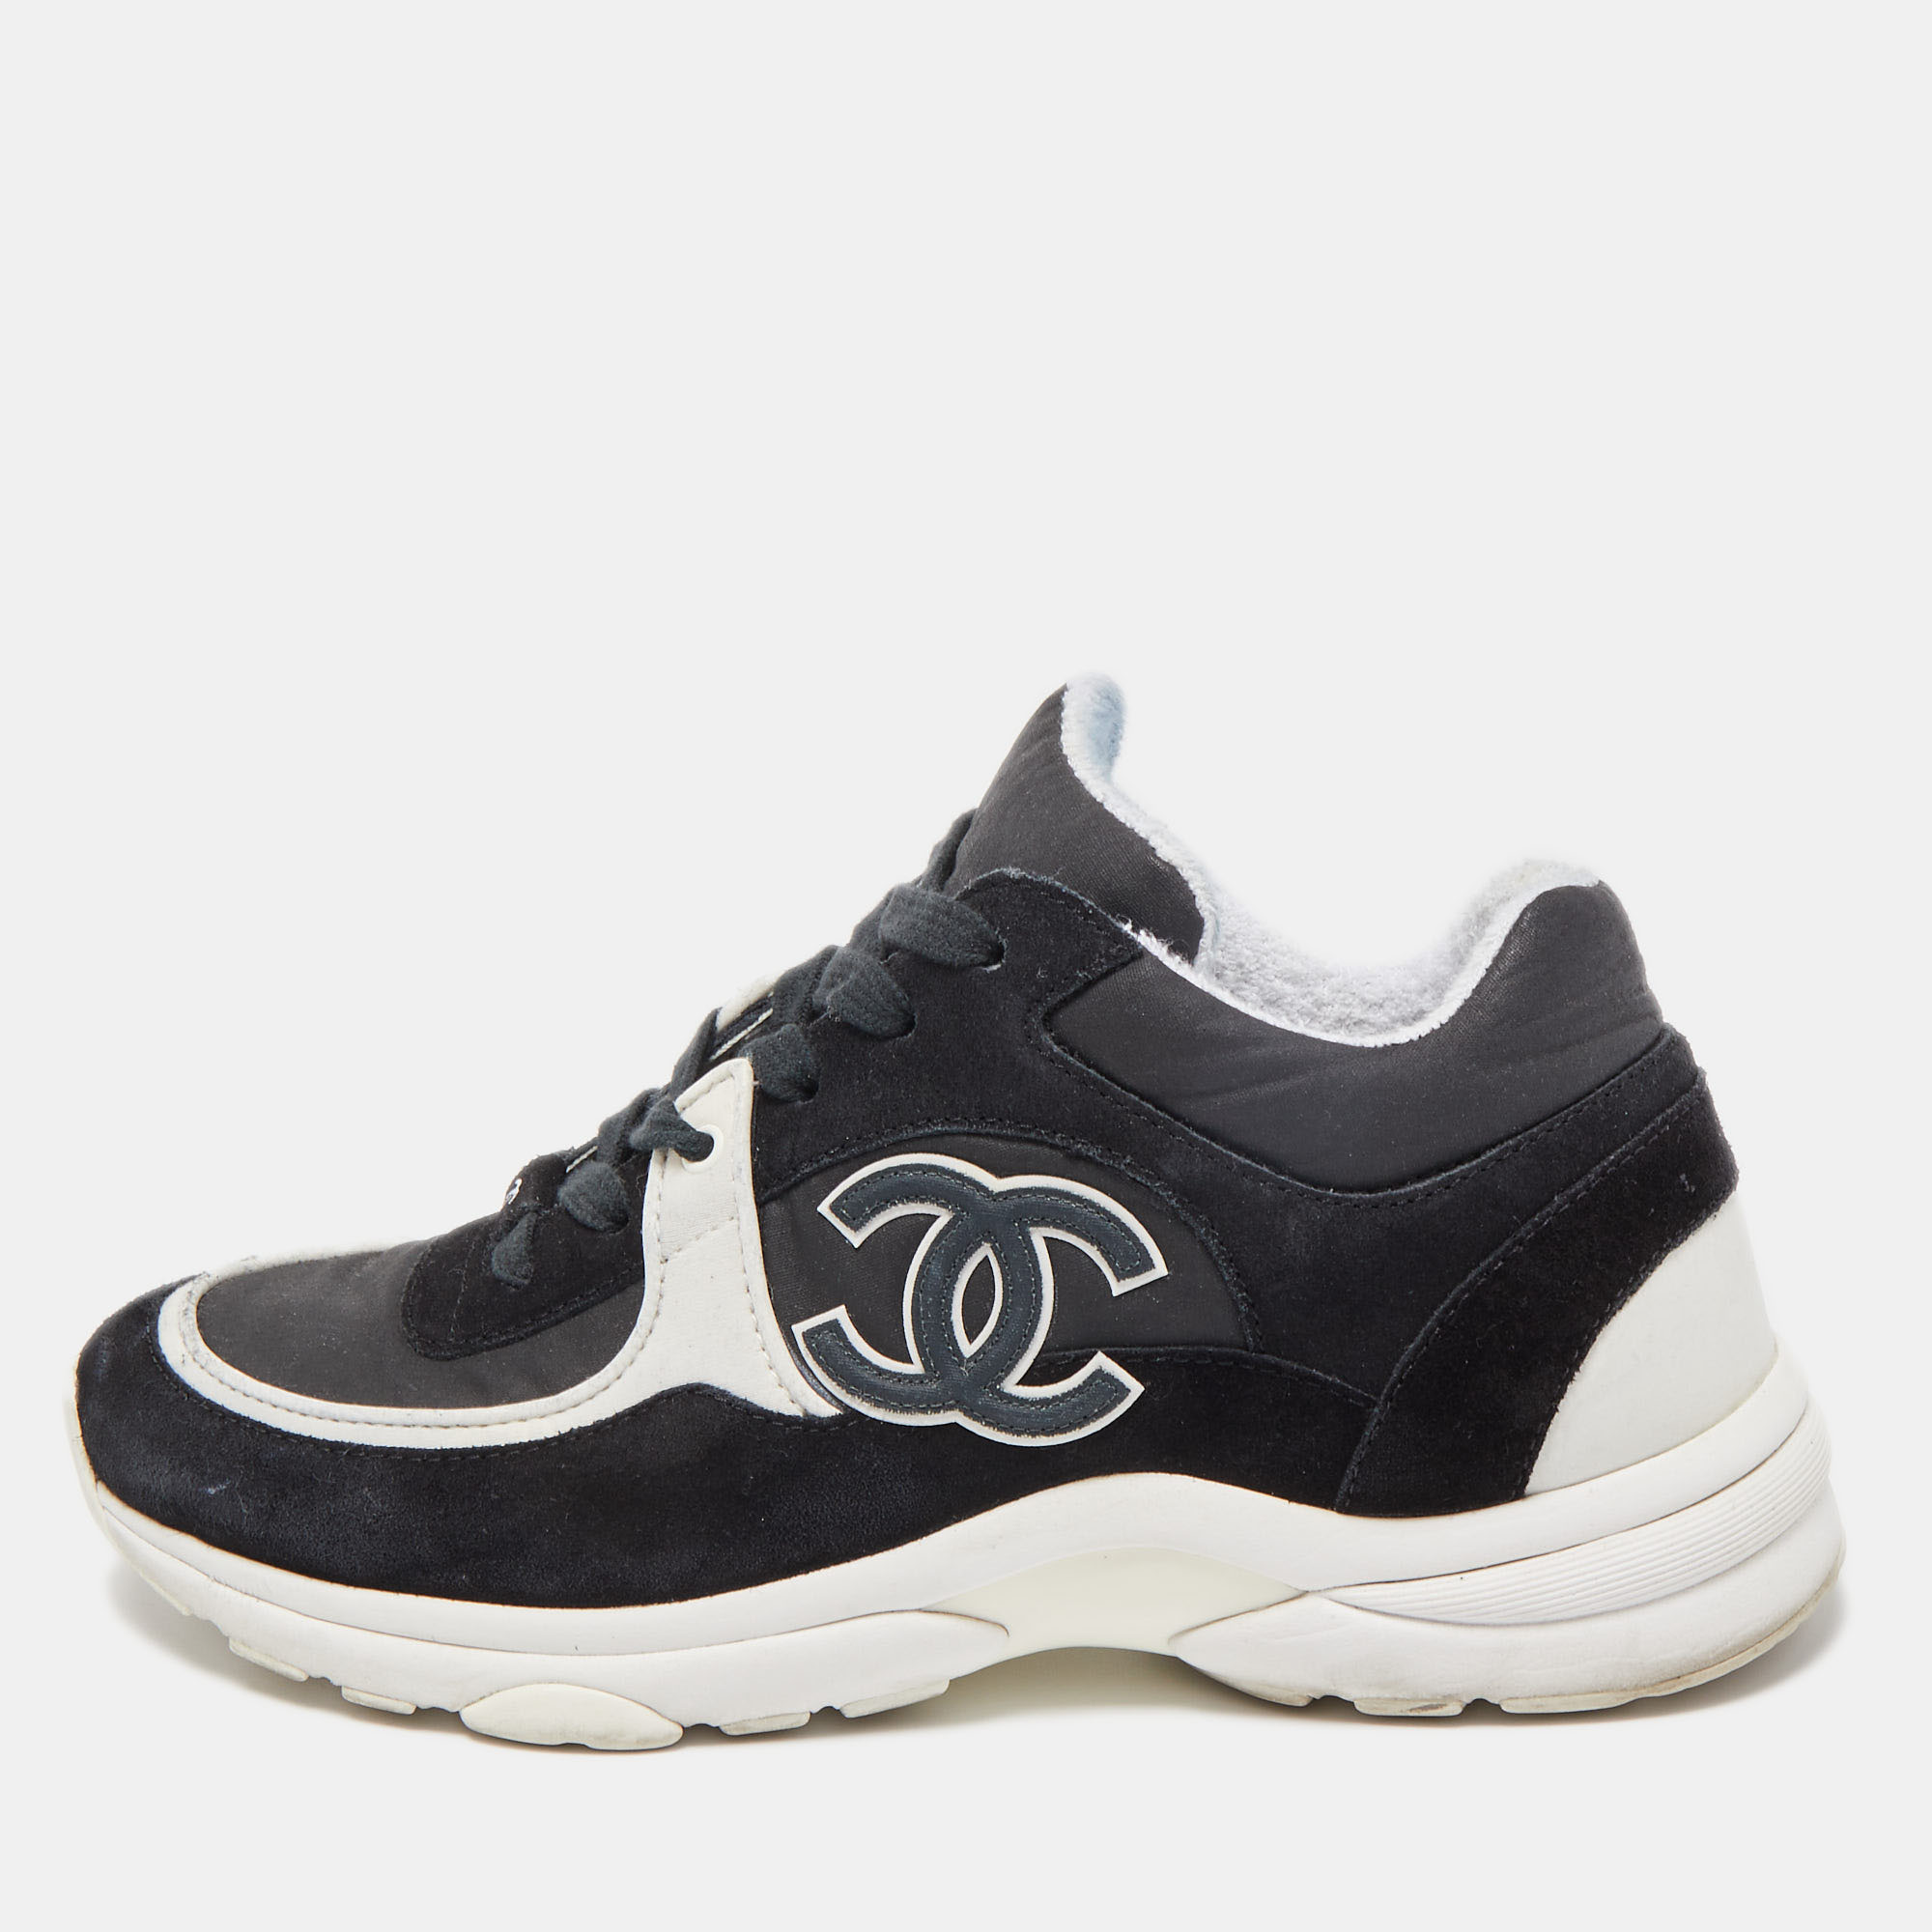 CHANEL Fabric Suede Calfskin Stretch CC Sneakers 38.5 White Grey